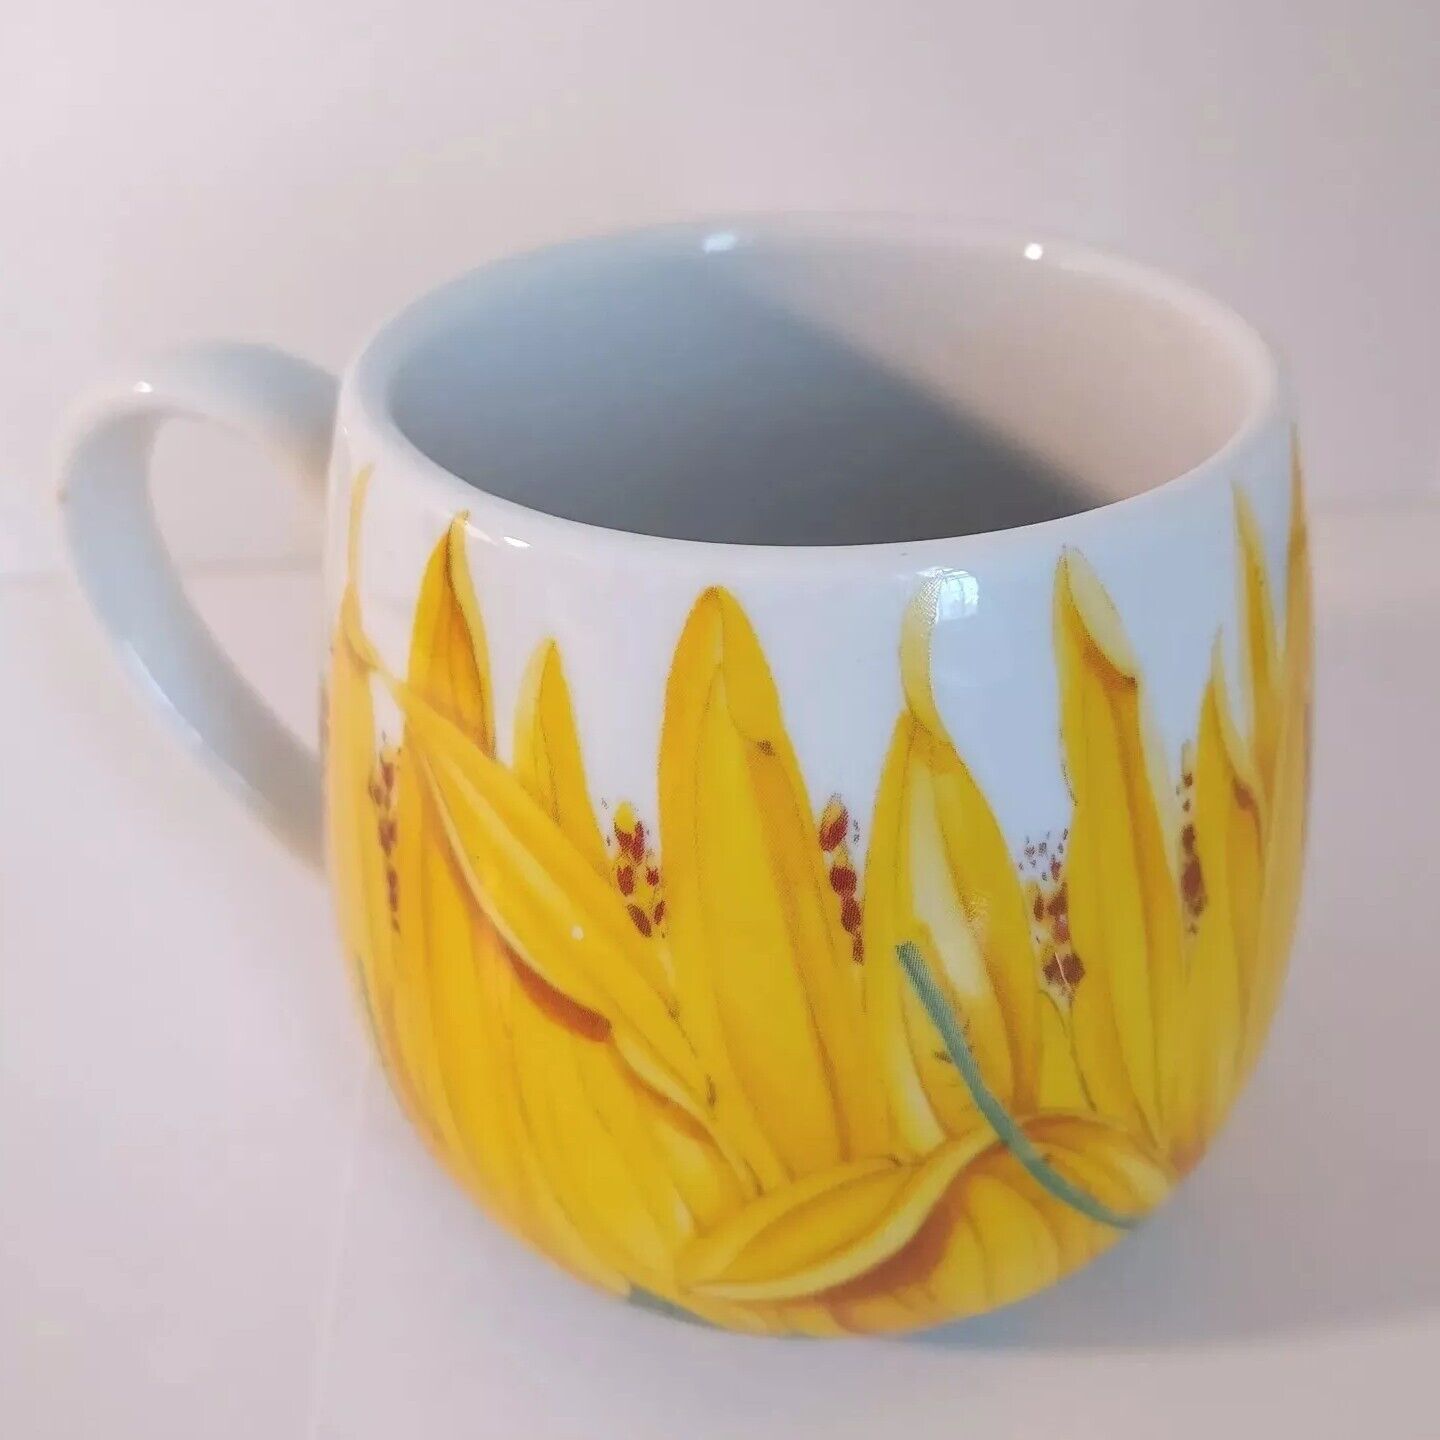 Sunflower Round Coffee Tea Snuggle Mug Warms Your Hands Vibrant Colors by Konitz